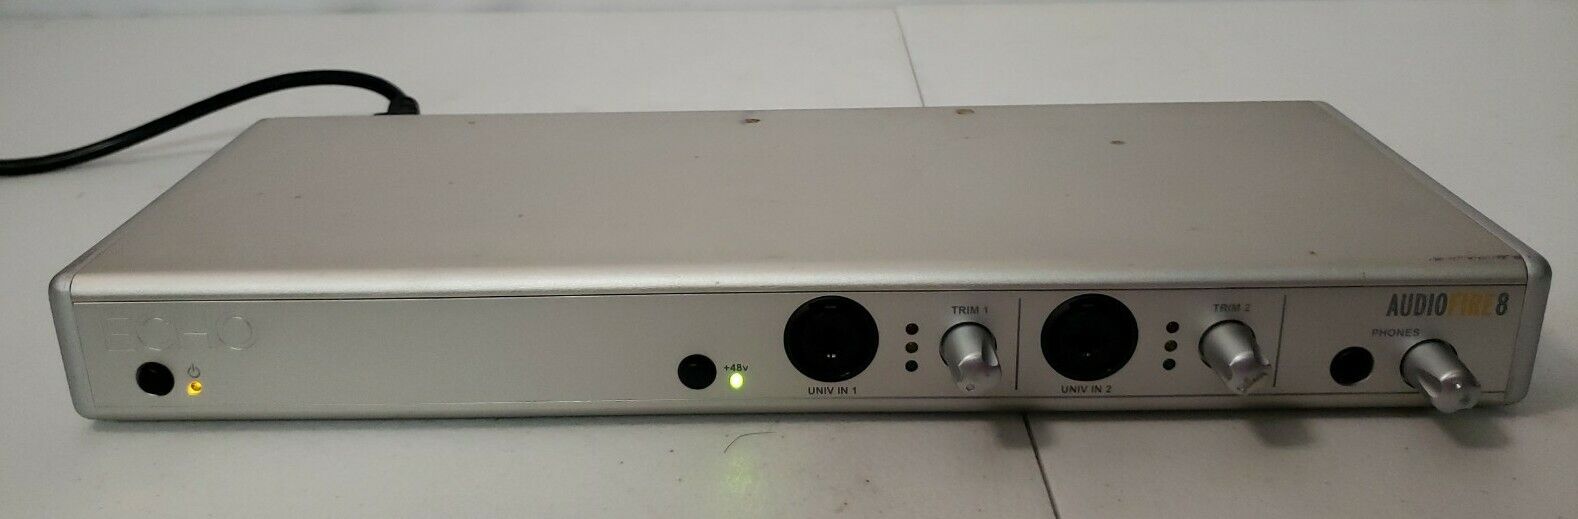 Trust ECHO AudioFire8 Audio Interface Outlet SALE Tested ‐ Working